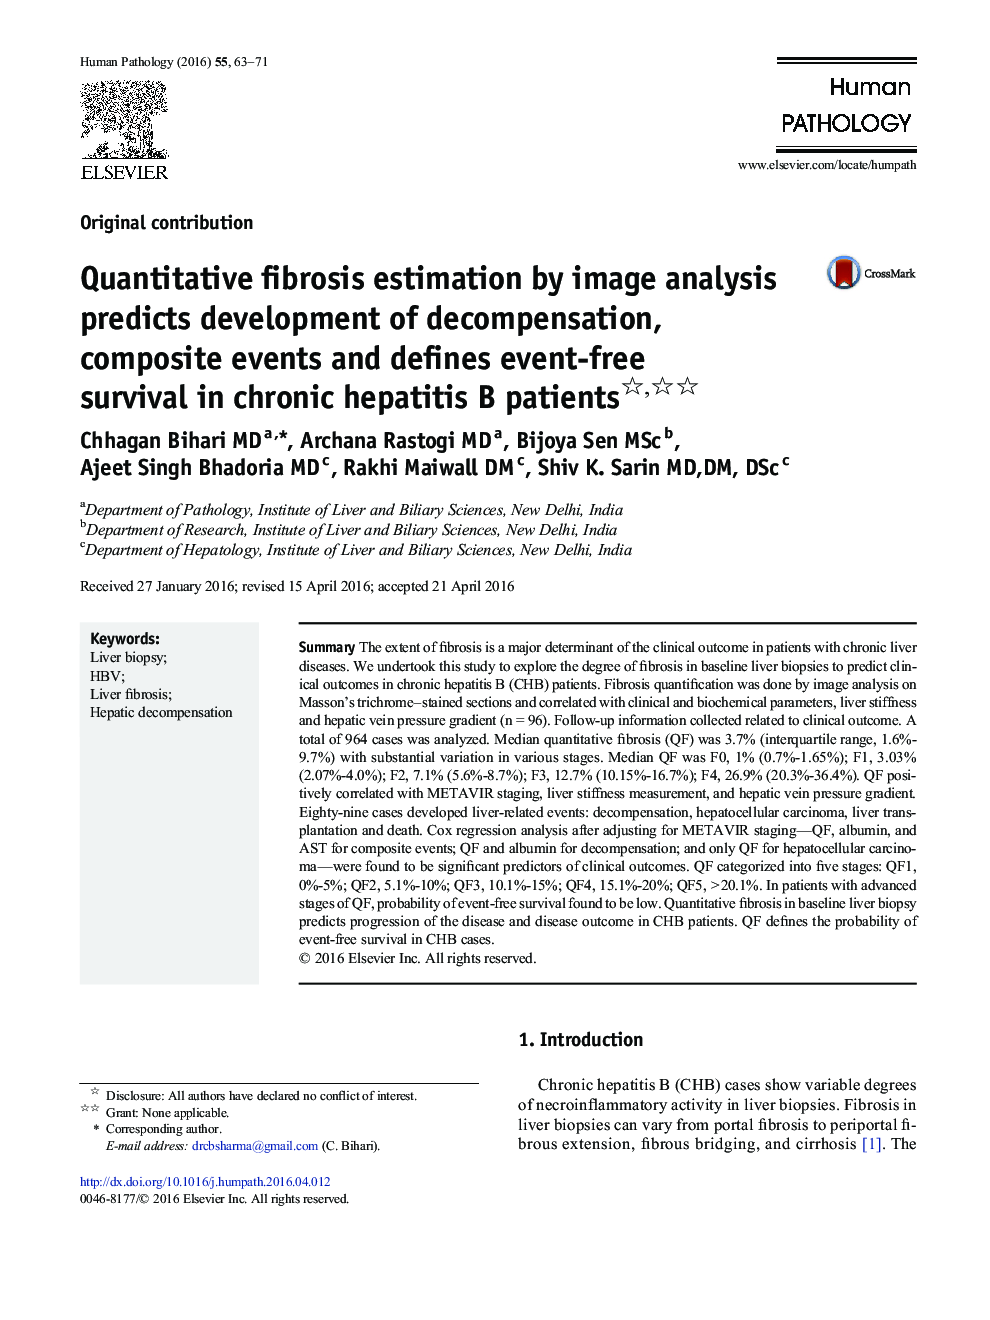 Quantitative fibrosis estimation by image analysis predicts development of decompensation, composite events and defines event-free survival in chronic hepatitis B patients